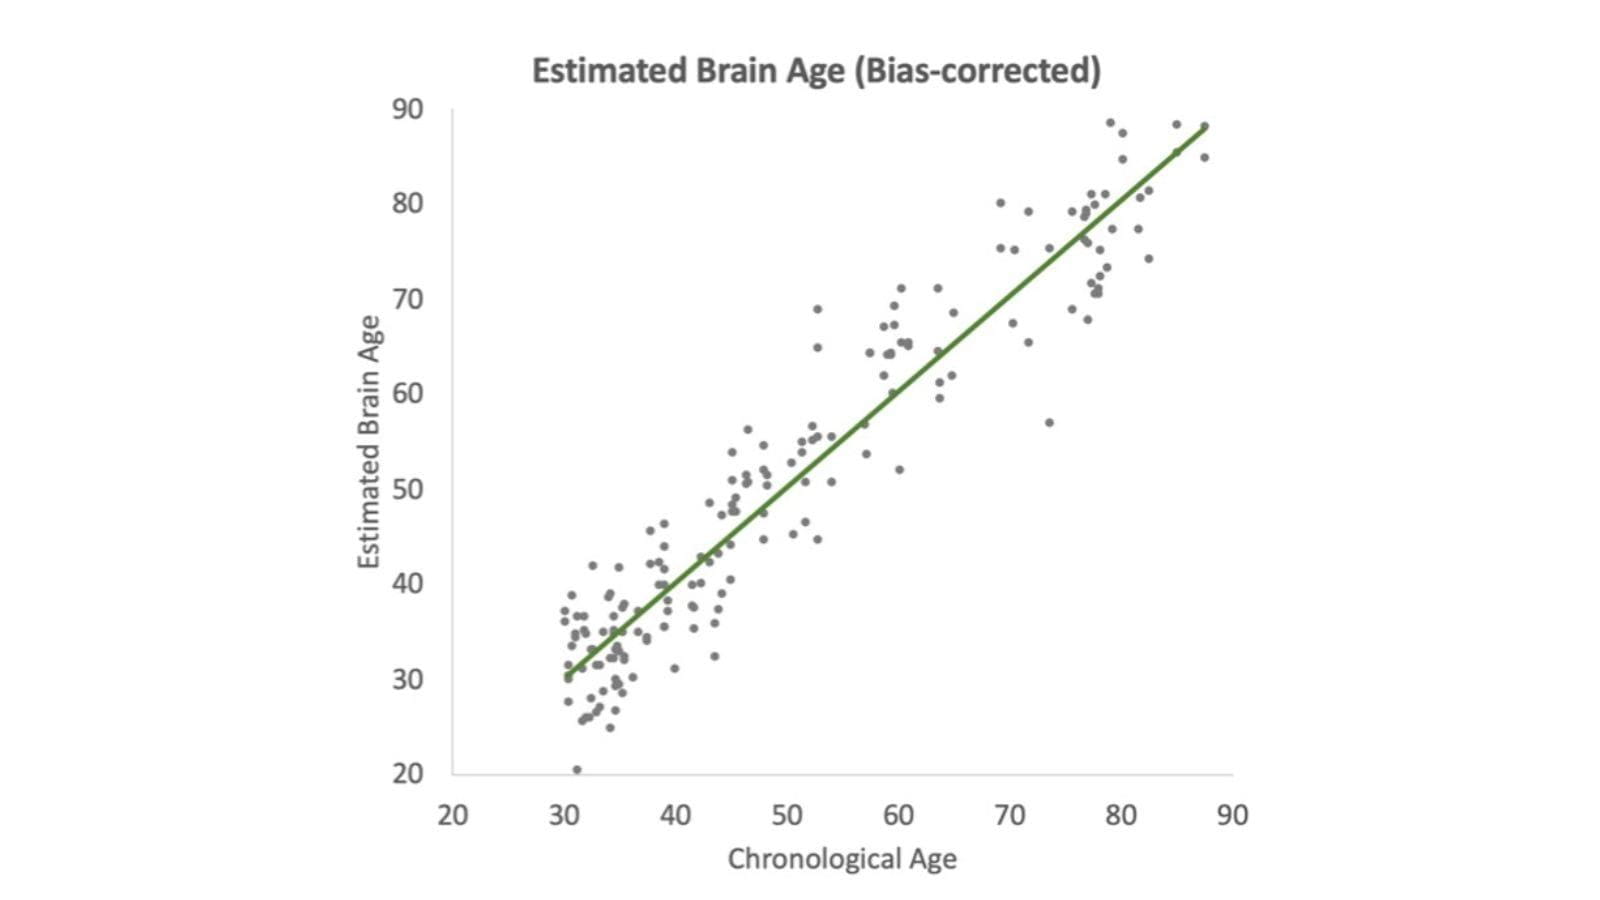 Graph with right, upward line and scattered dots showing brain age estimates in line with actual brain age